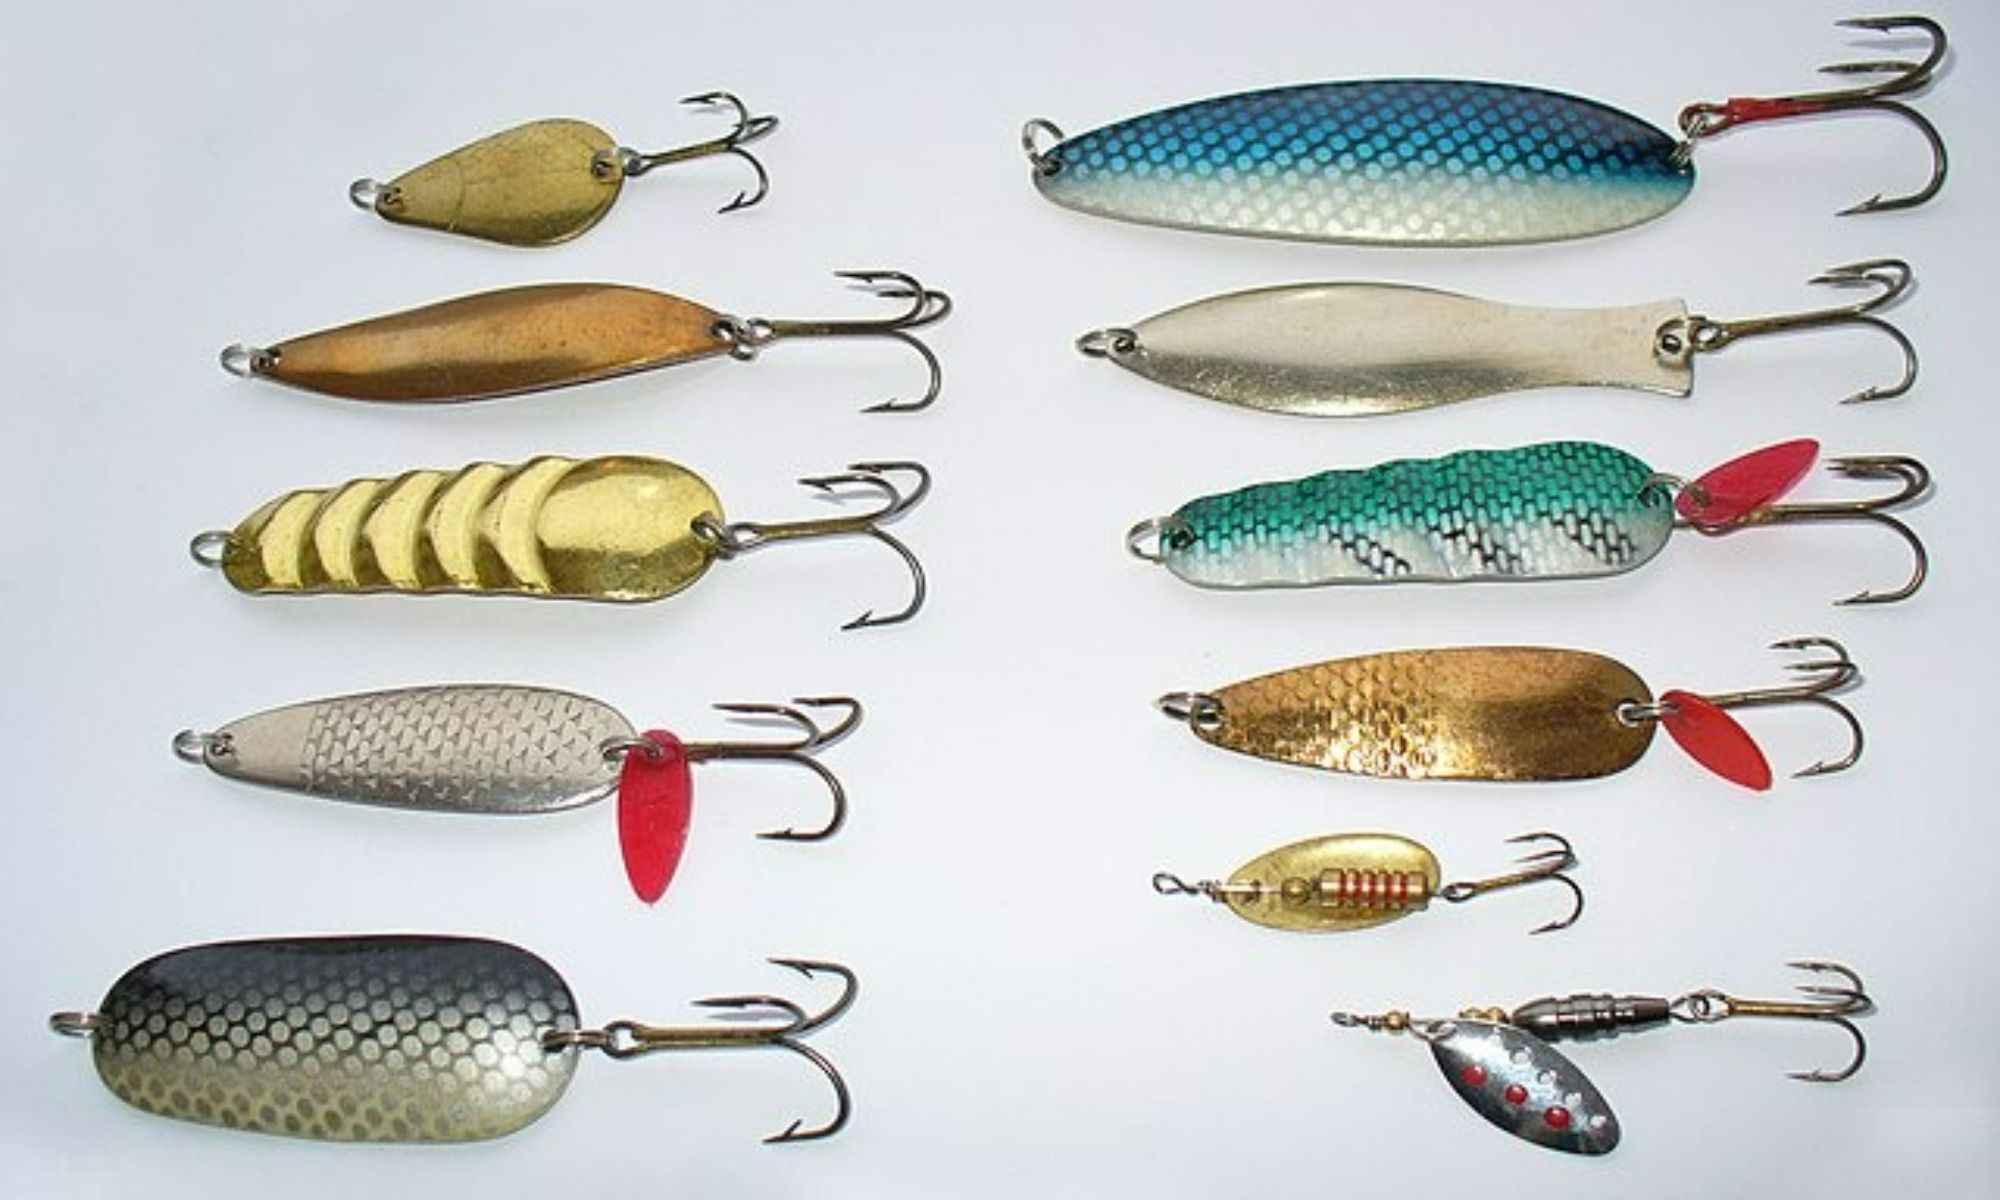 Top 5 Most Spoon-Bait Fish